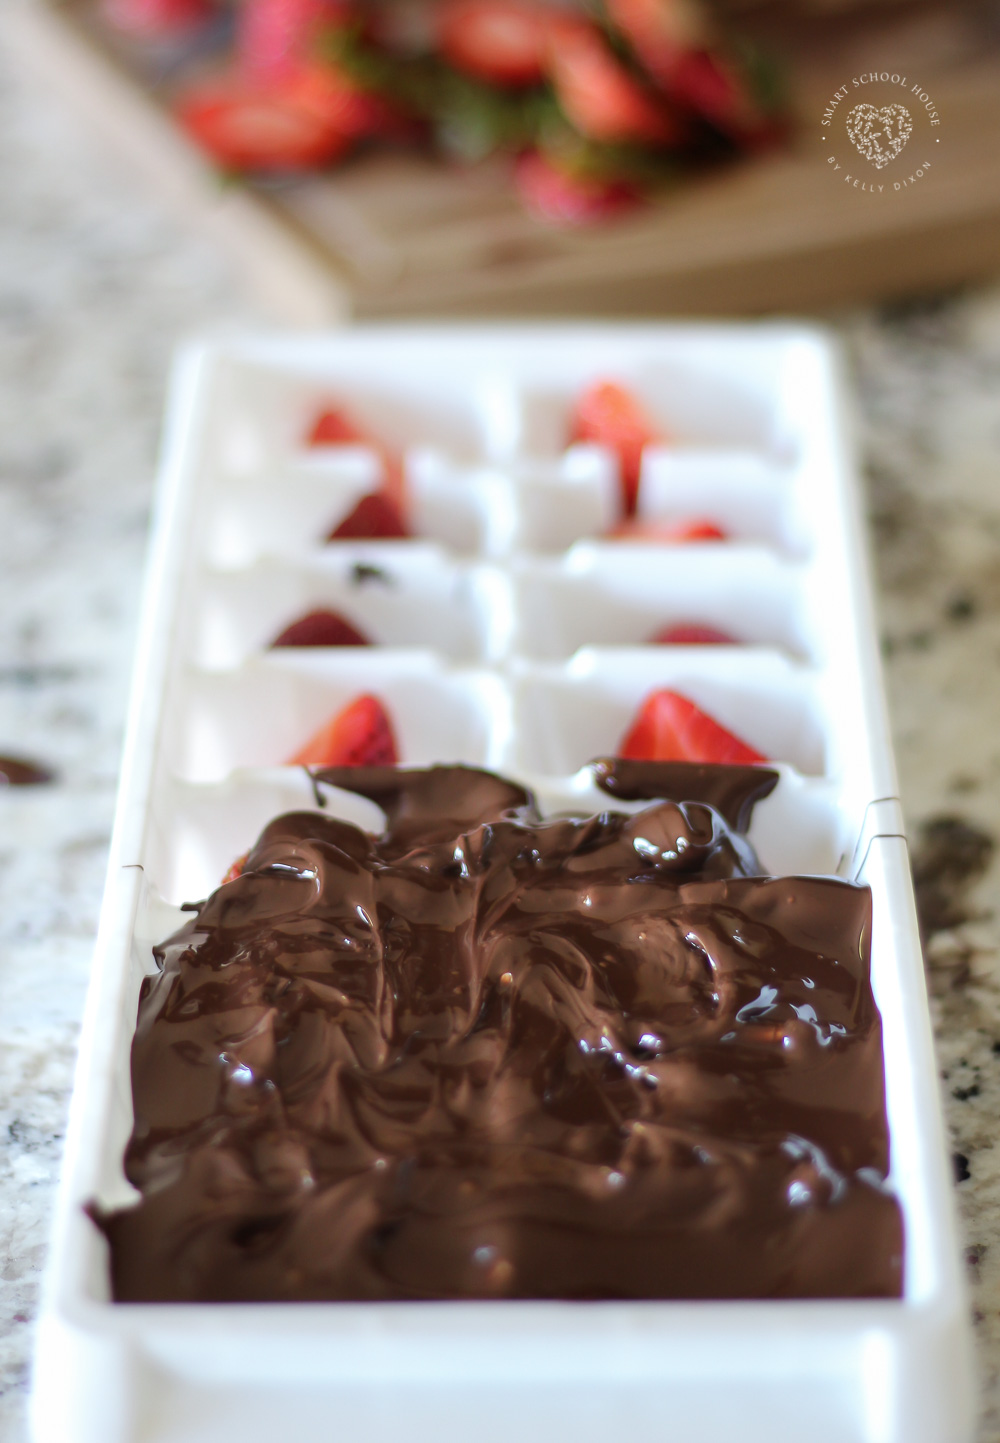 Chocolate Covered Strawberries in an Ice Cube Tray - These cost less than $5 to make! Perfect for entertaining or a night in. 